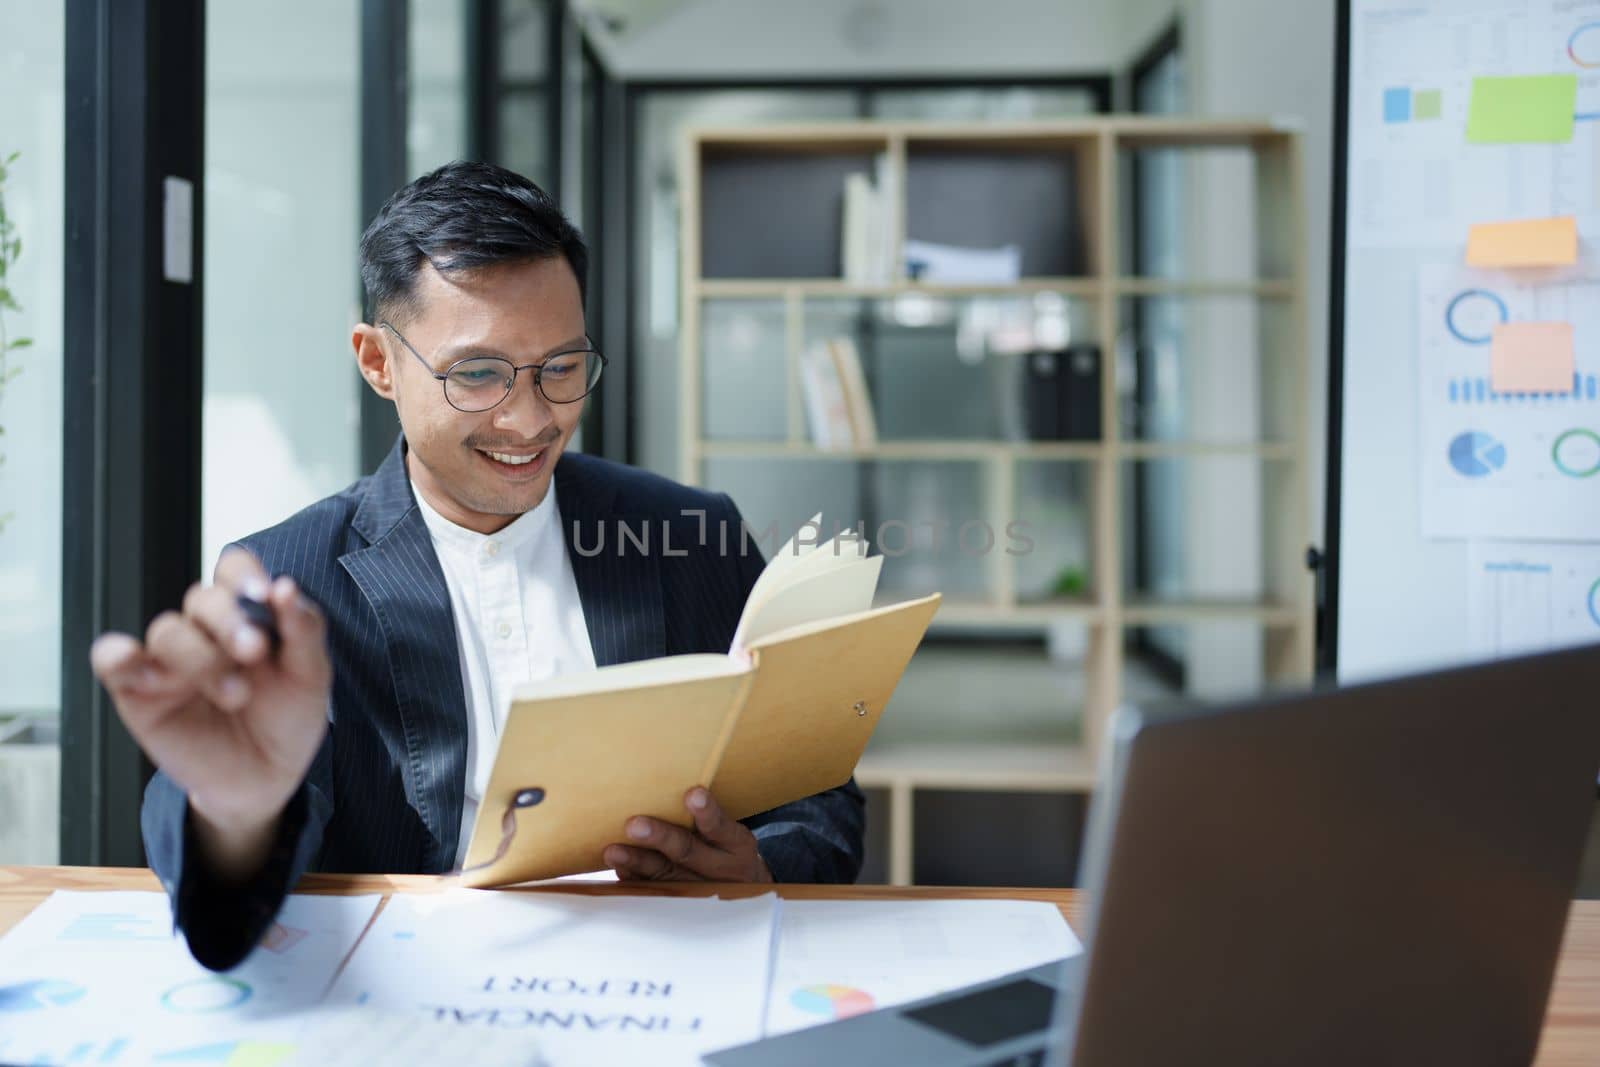 Portrait of a young Asian man showing a smiling face as she uses his notebook, computer and financial documents on her desk in the early morning hours.